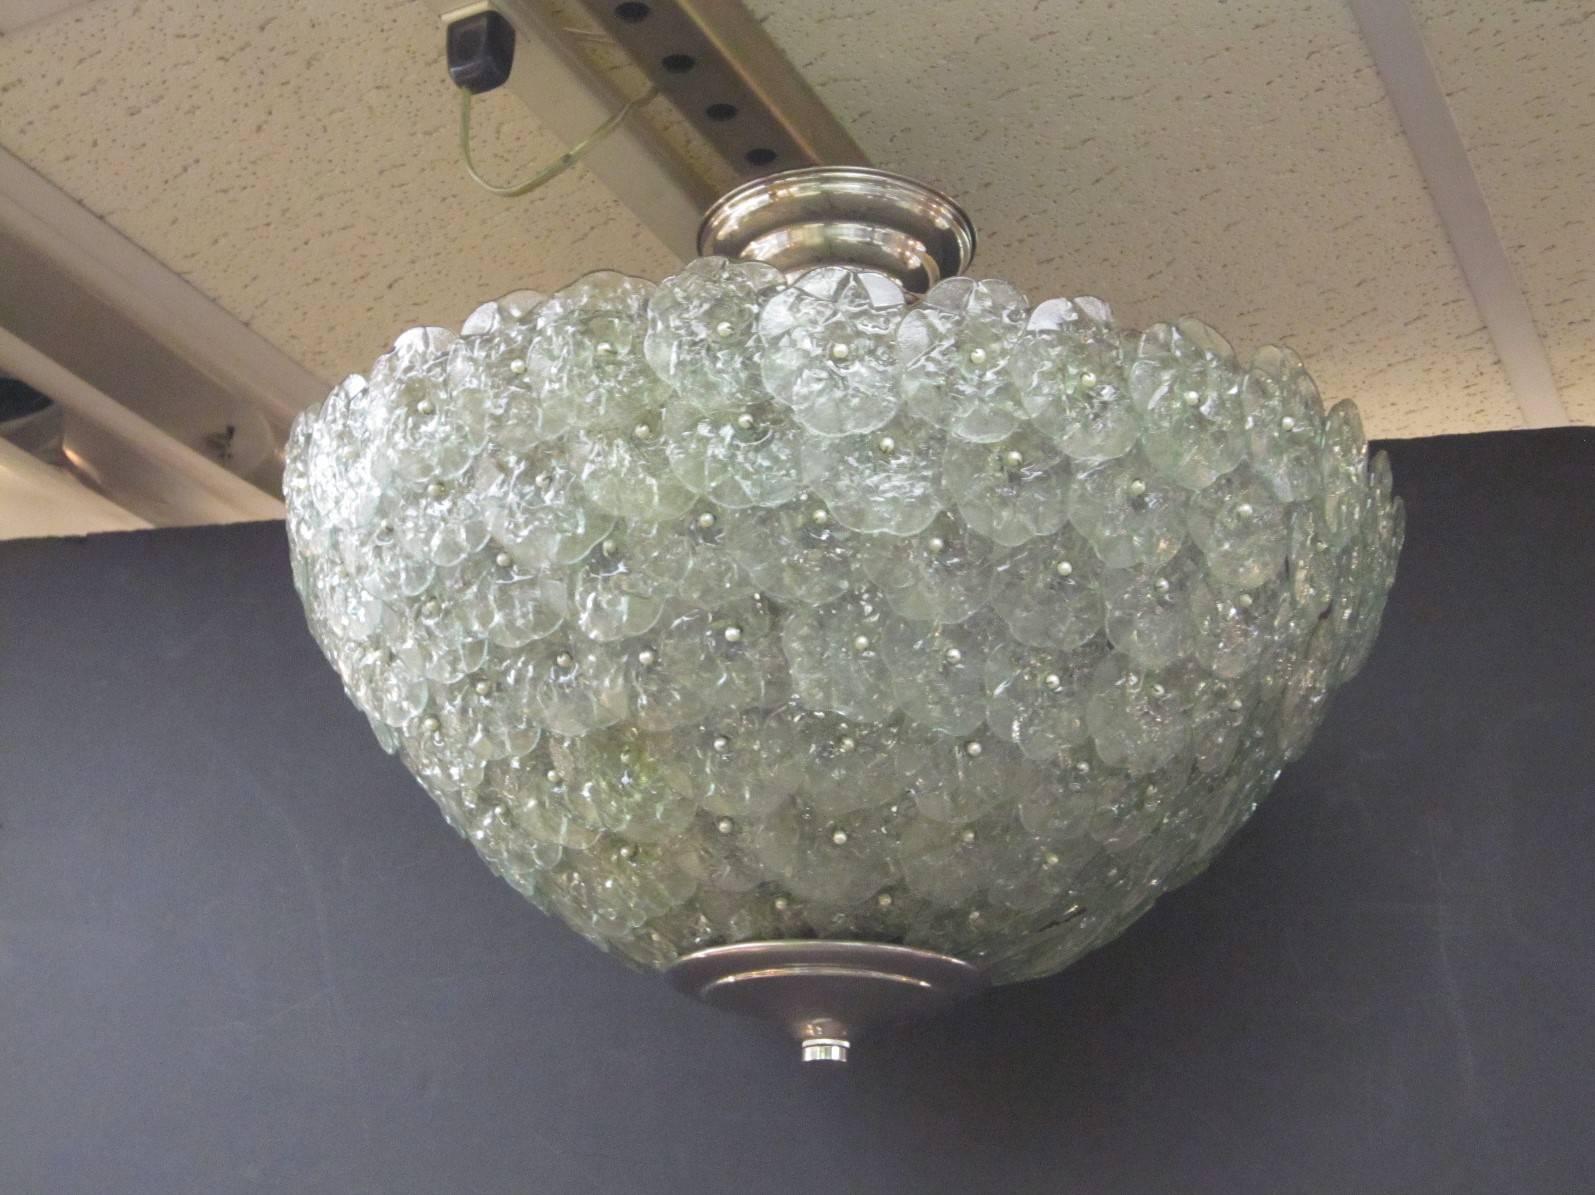 Mid-Century Modern handblown Italian flush mount chandelier featuring overlapping crystal flowers in light emerald green, celadon mounted on a webbed metal frame.
Attributed to Barovier et Toso
We can lengthen or shorten this to any height, even